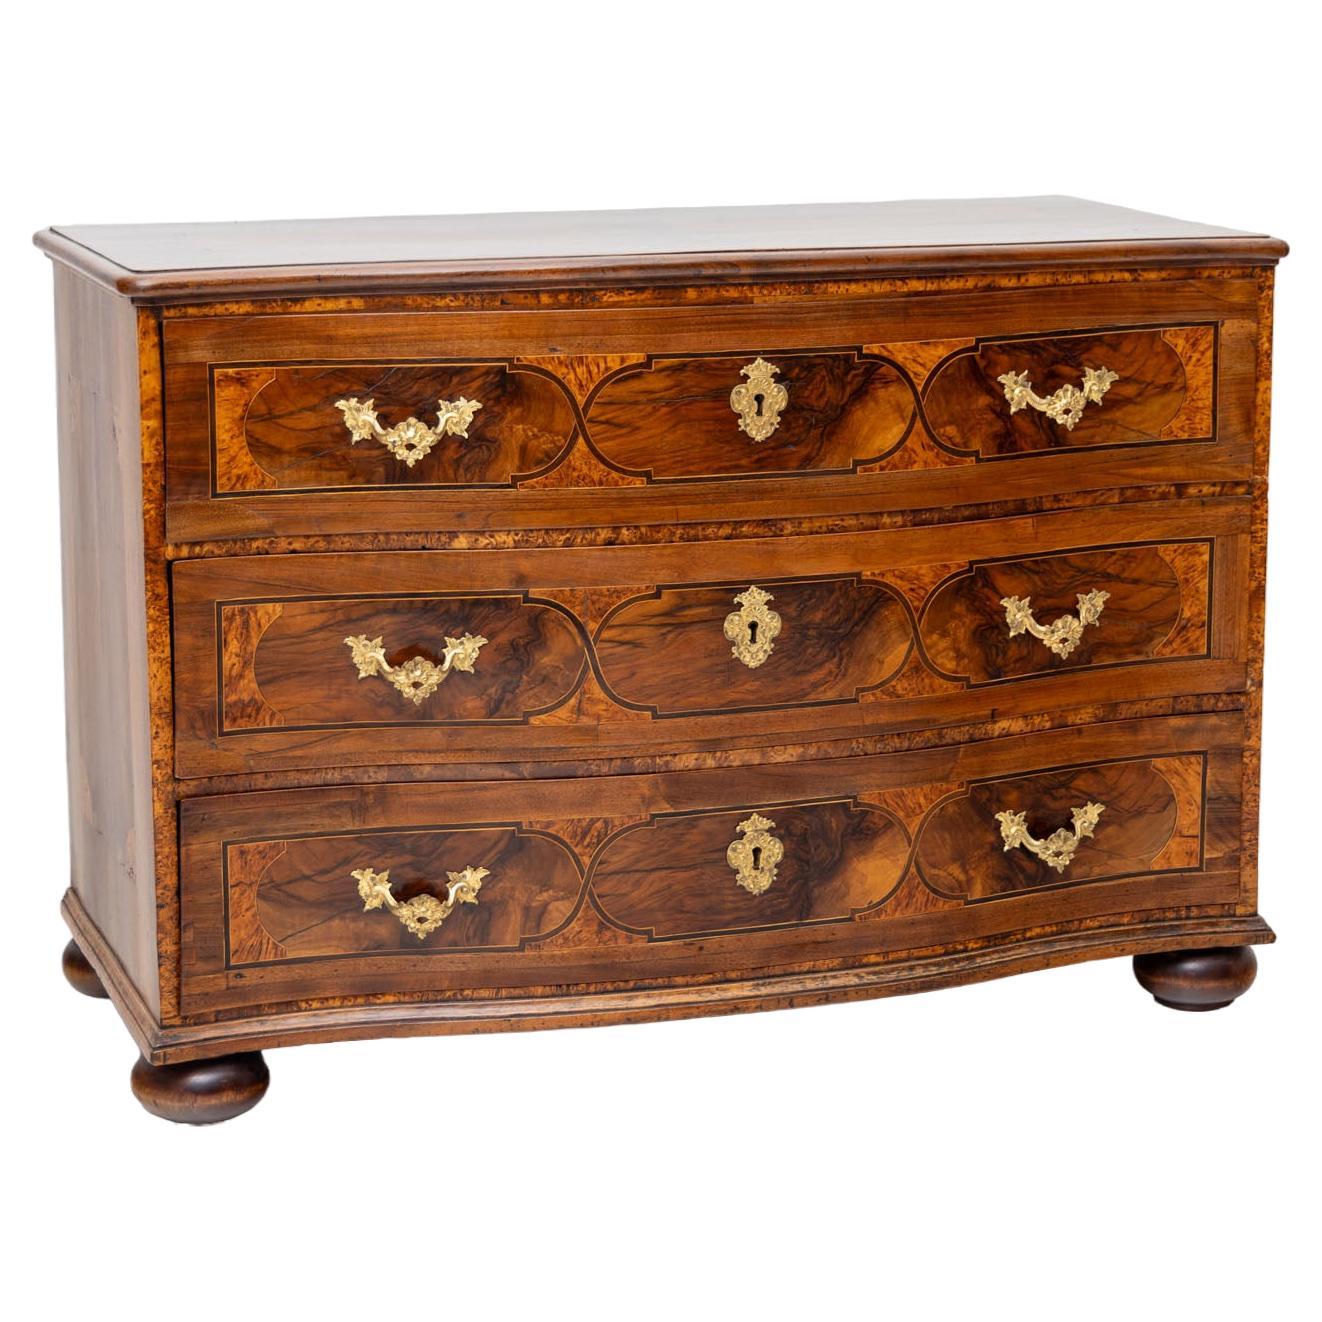 Baroque Chest of Drawers in Walnut, Inlaywork and Bronze fittings, Mid-18th C. For Sale